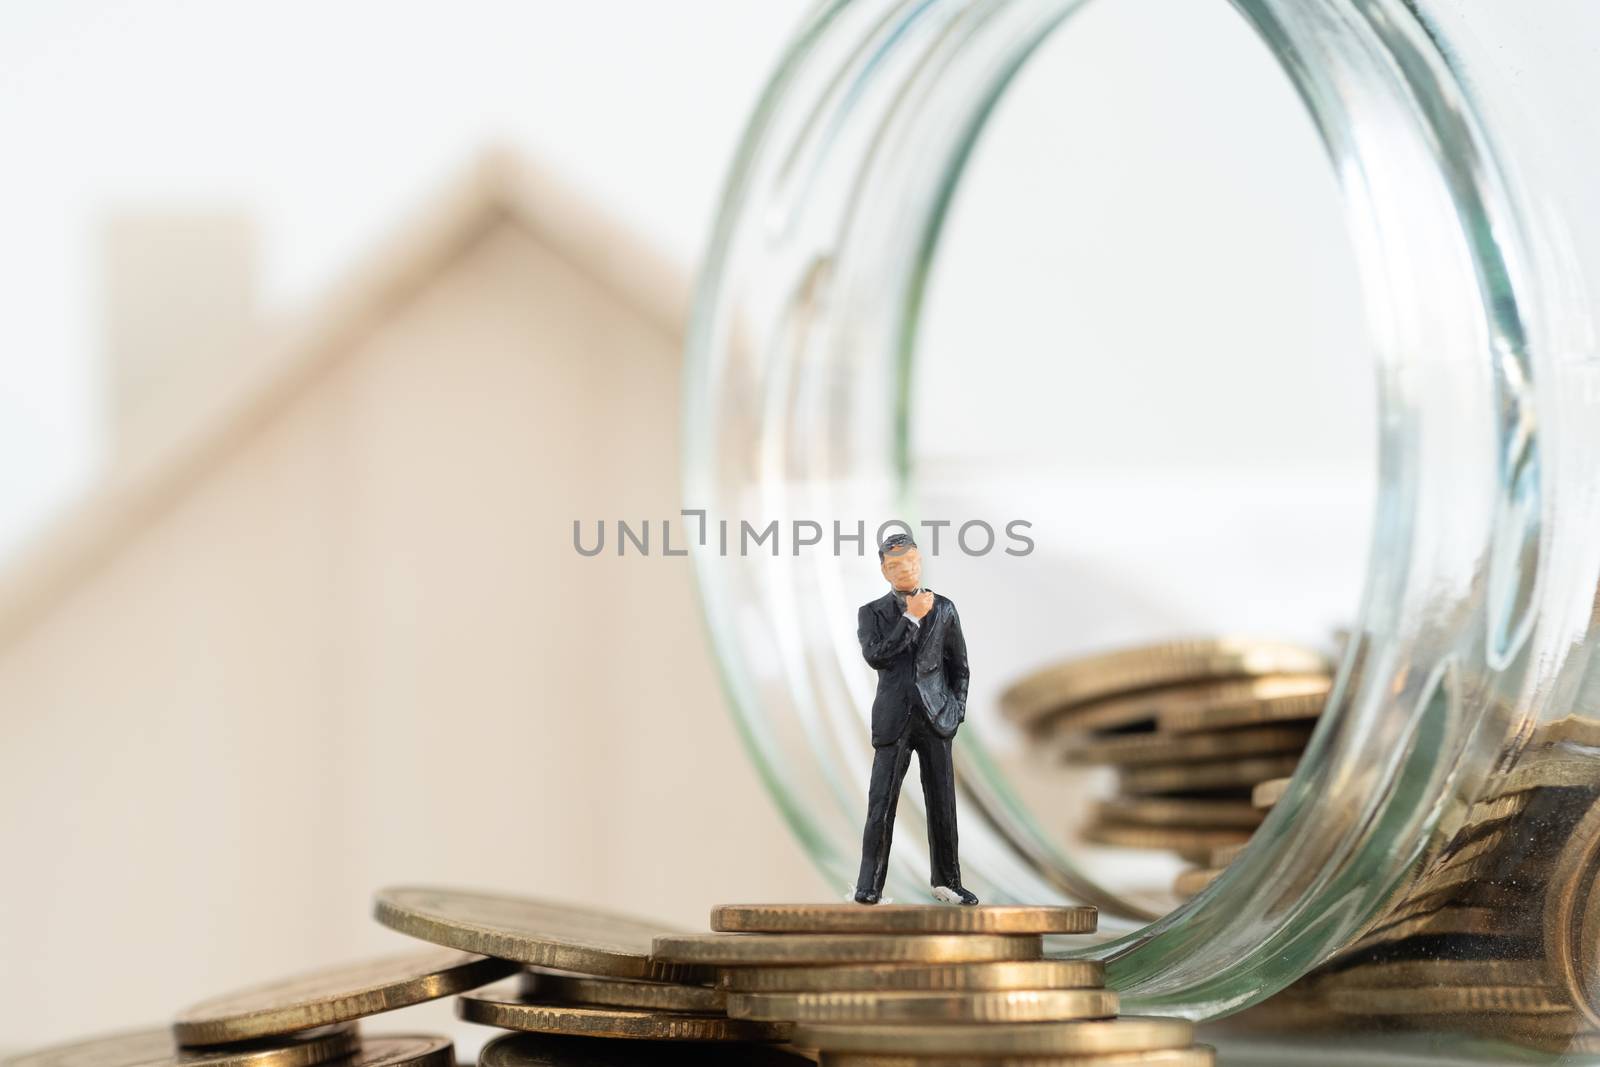 miniature of business model thinking about Investment strategy by Toefotostock